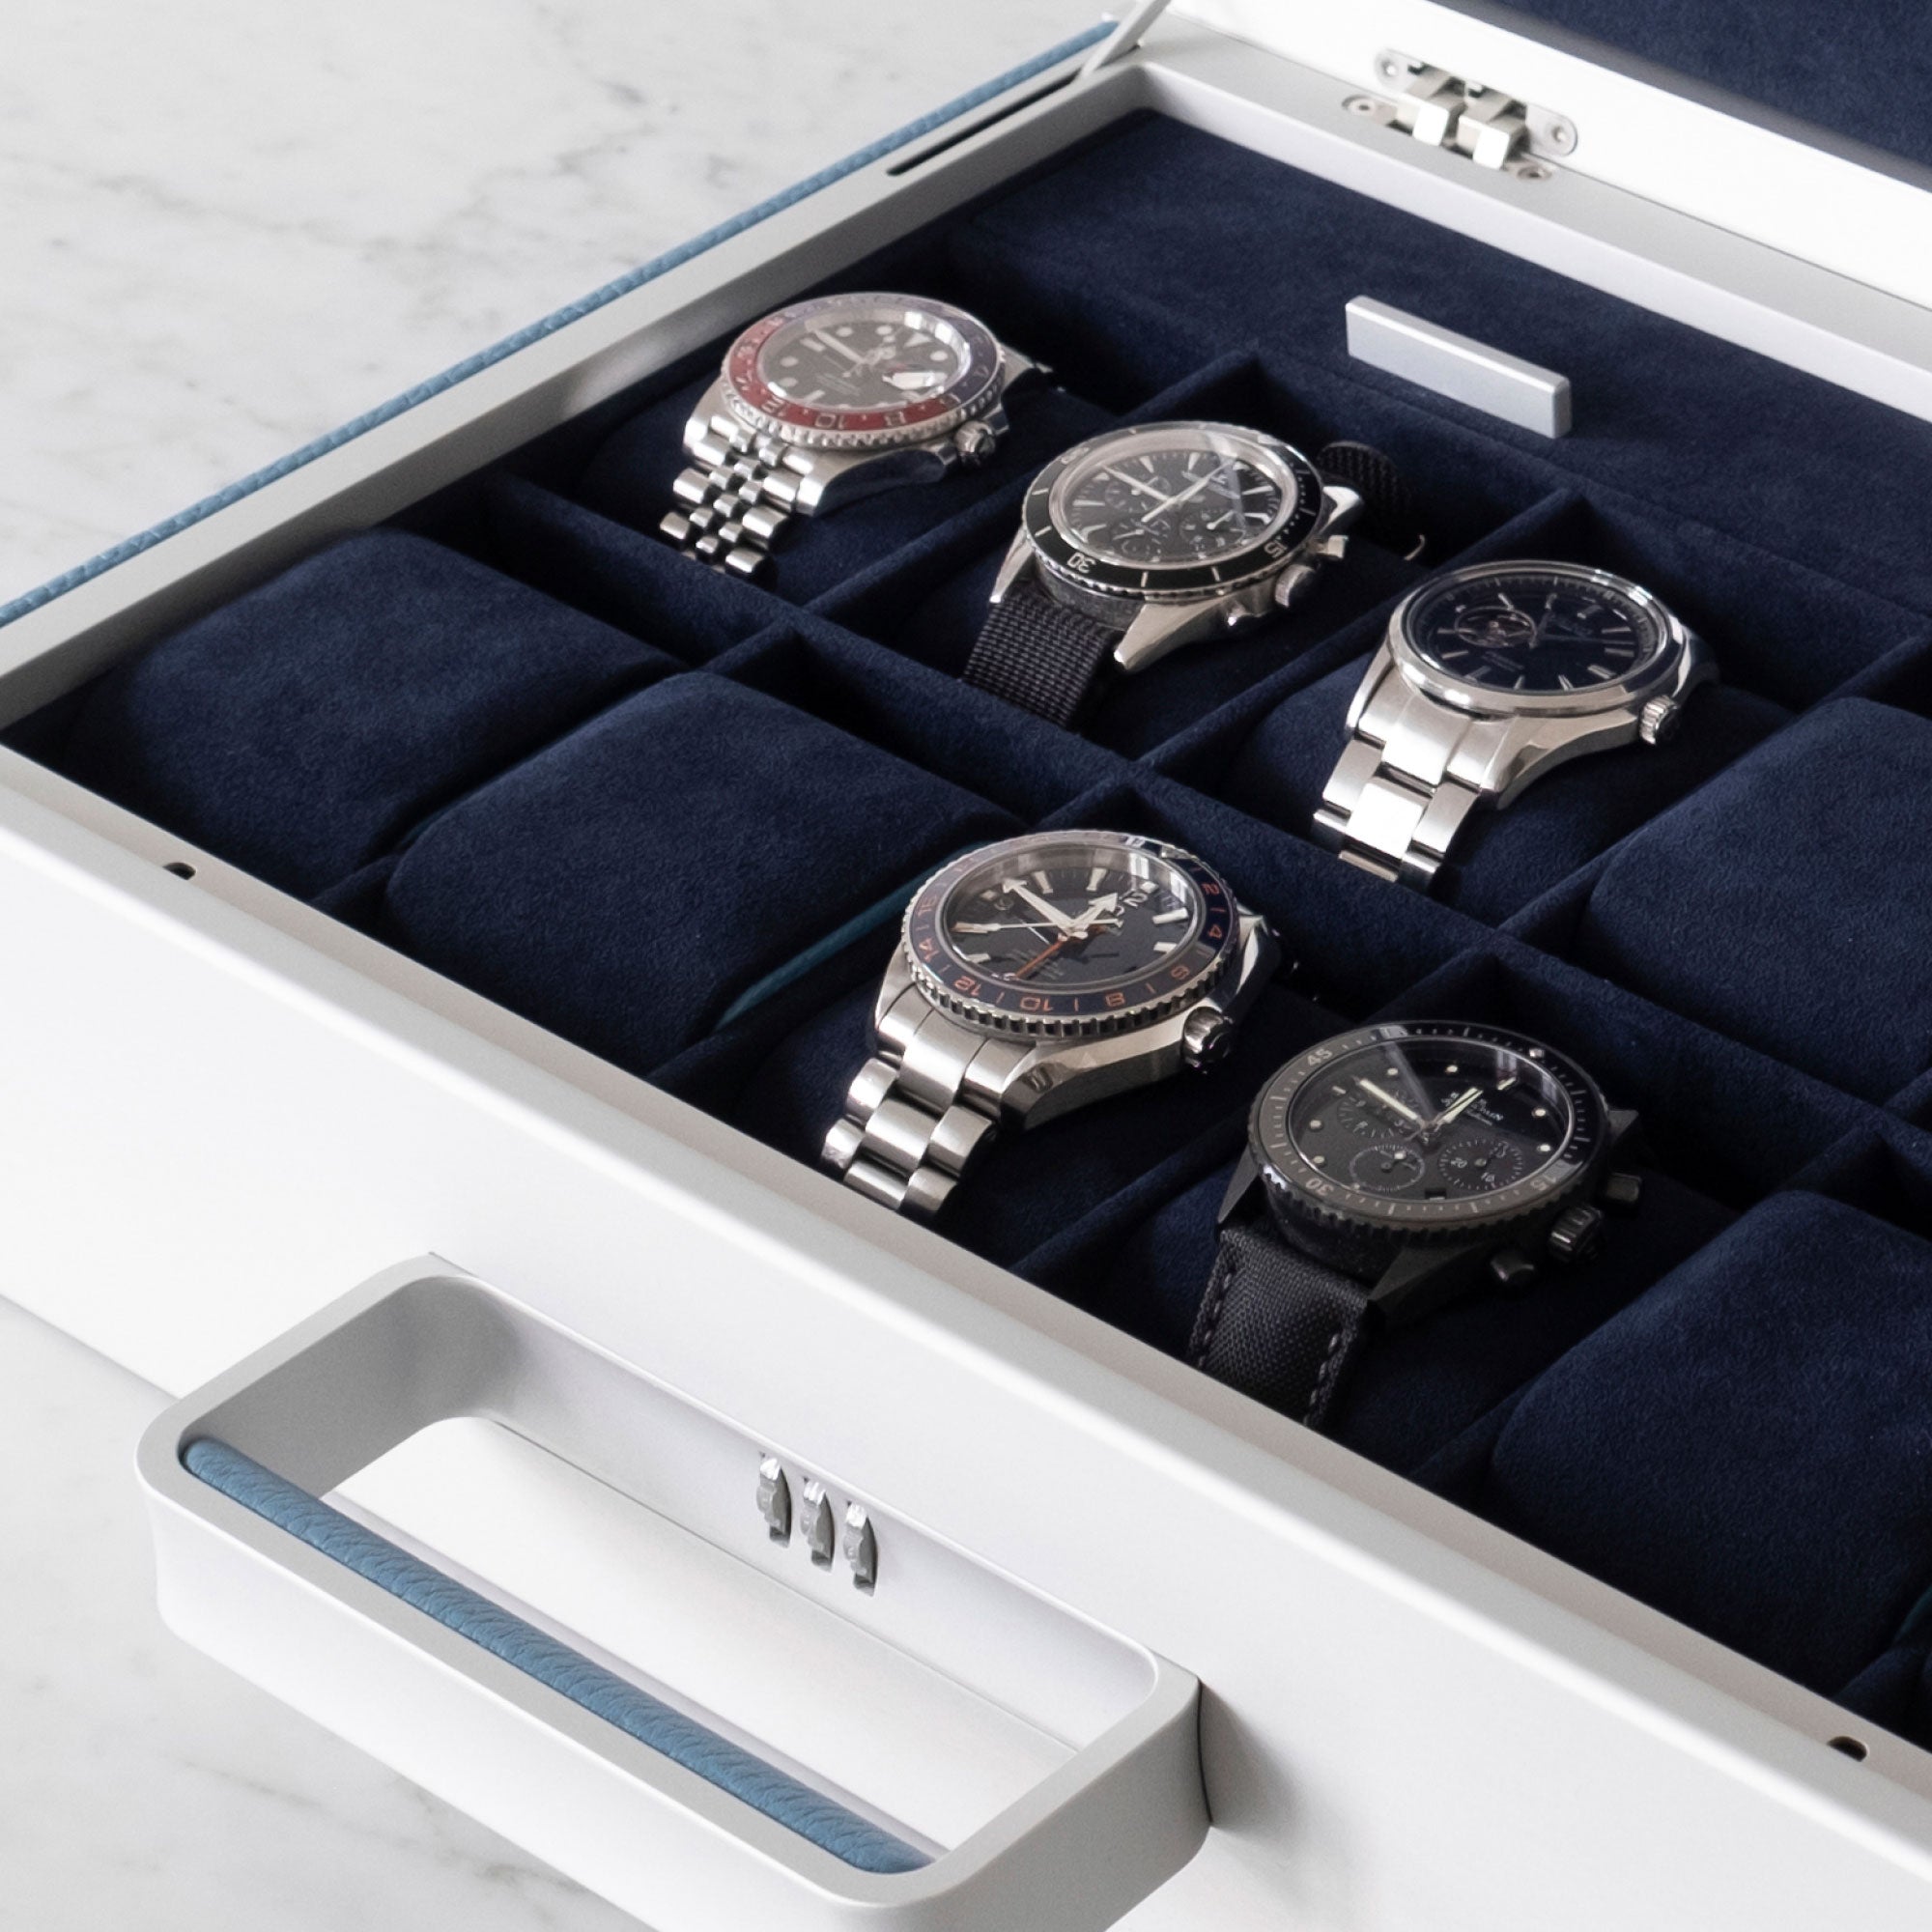 Lifestyle shot of Mackenzie 12 watch briefcase filled with luxury watches including Rolex, Blancpain and Omega